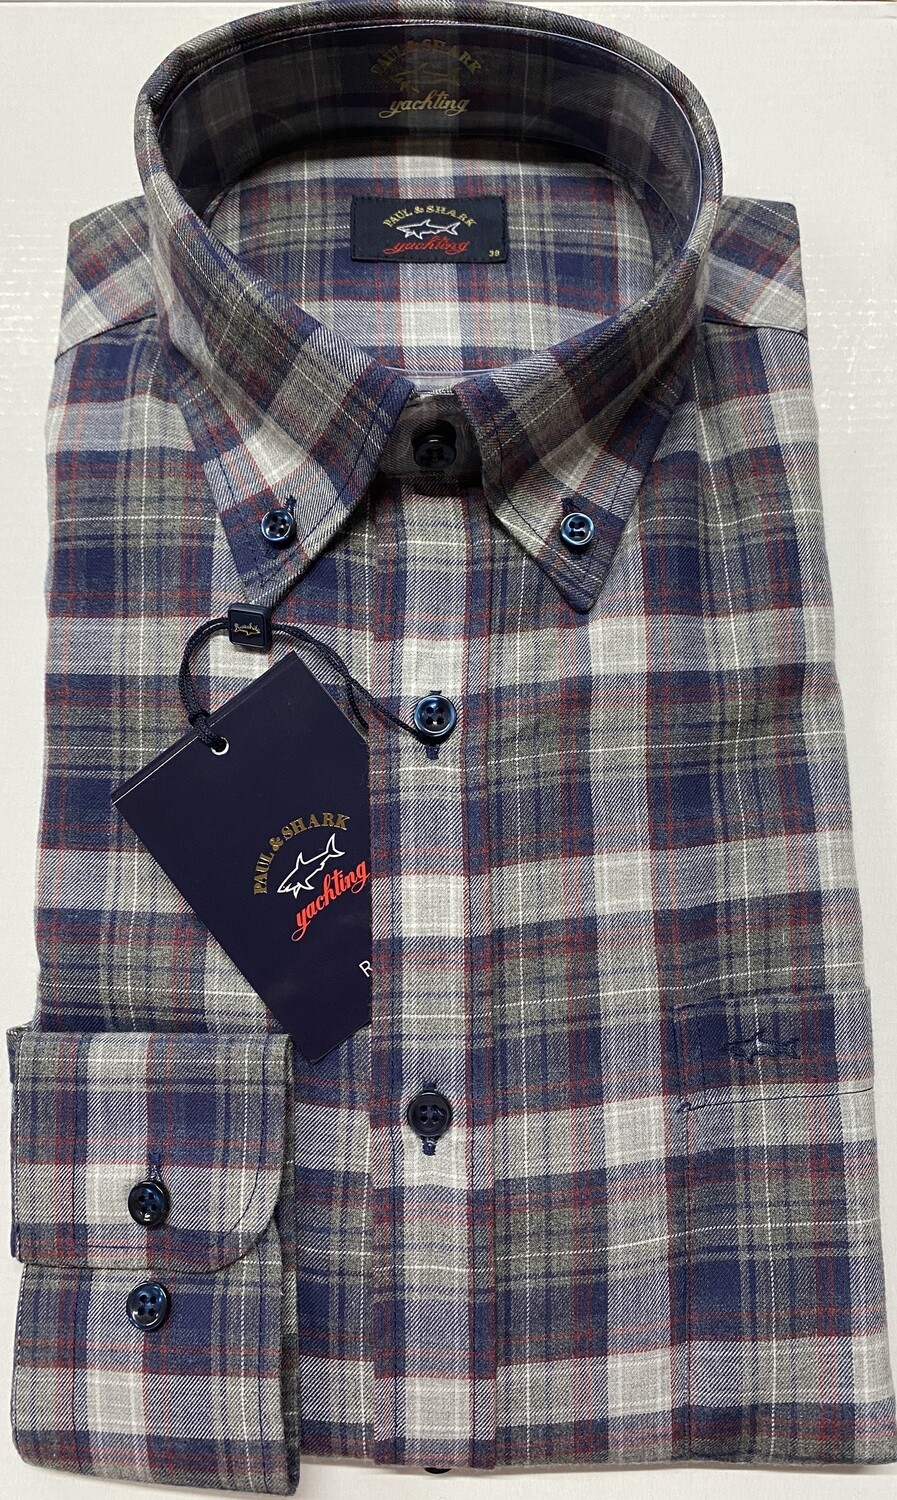 Paul and Shark Flannel Check shirt - Grey/Wine/Navy